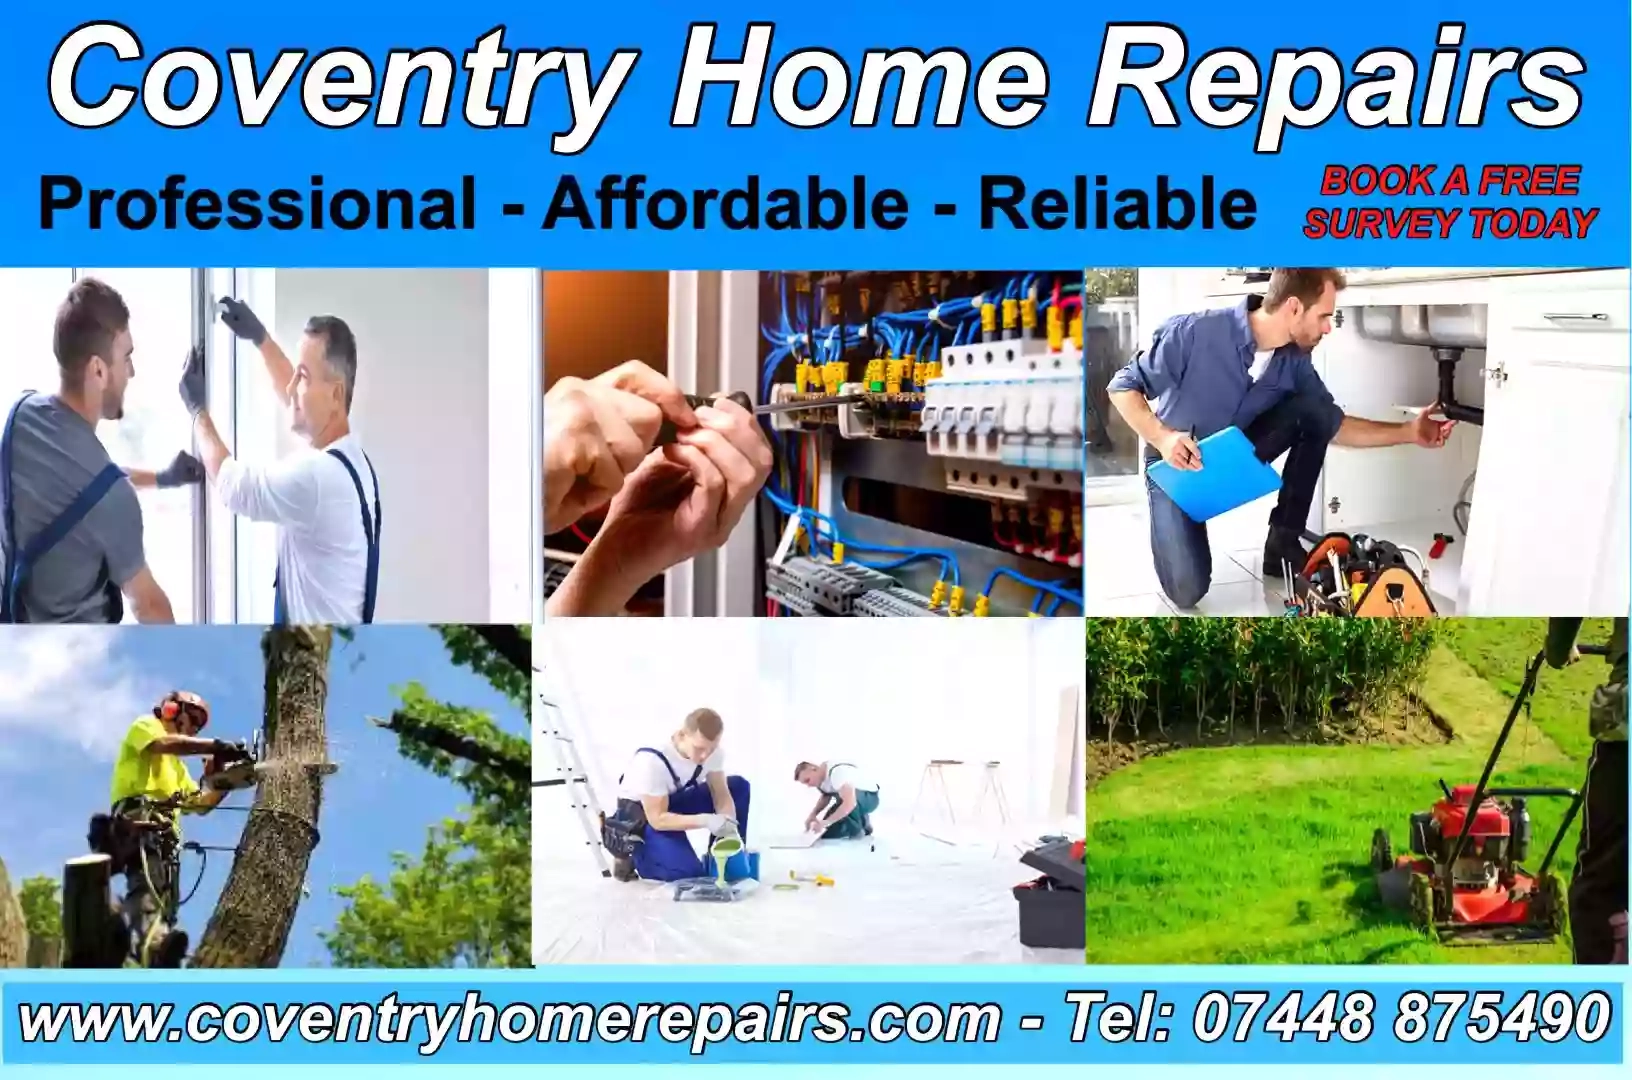 Coventry Home Repairs